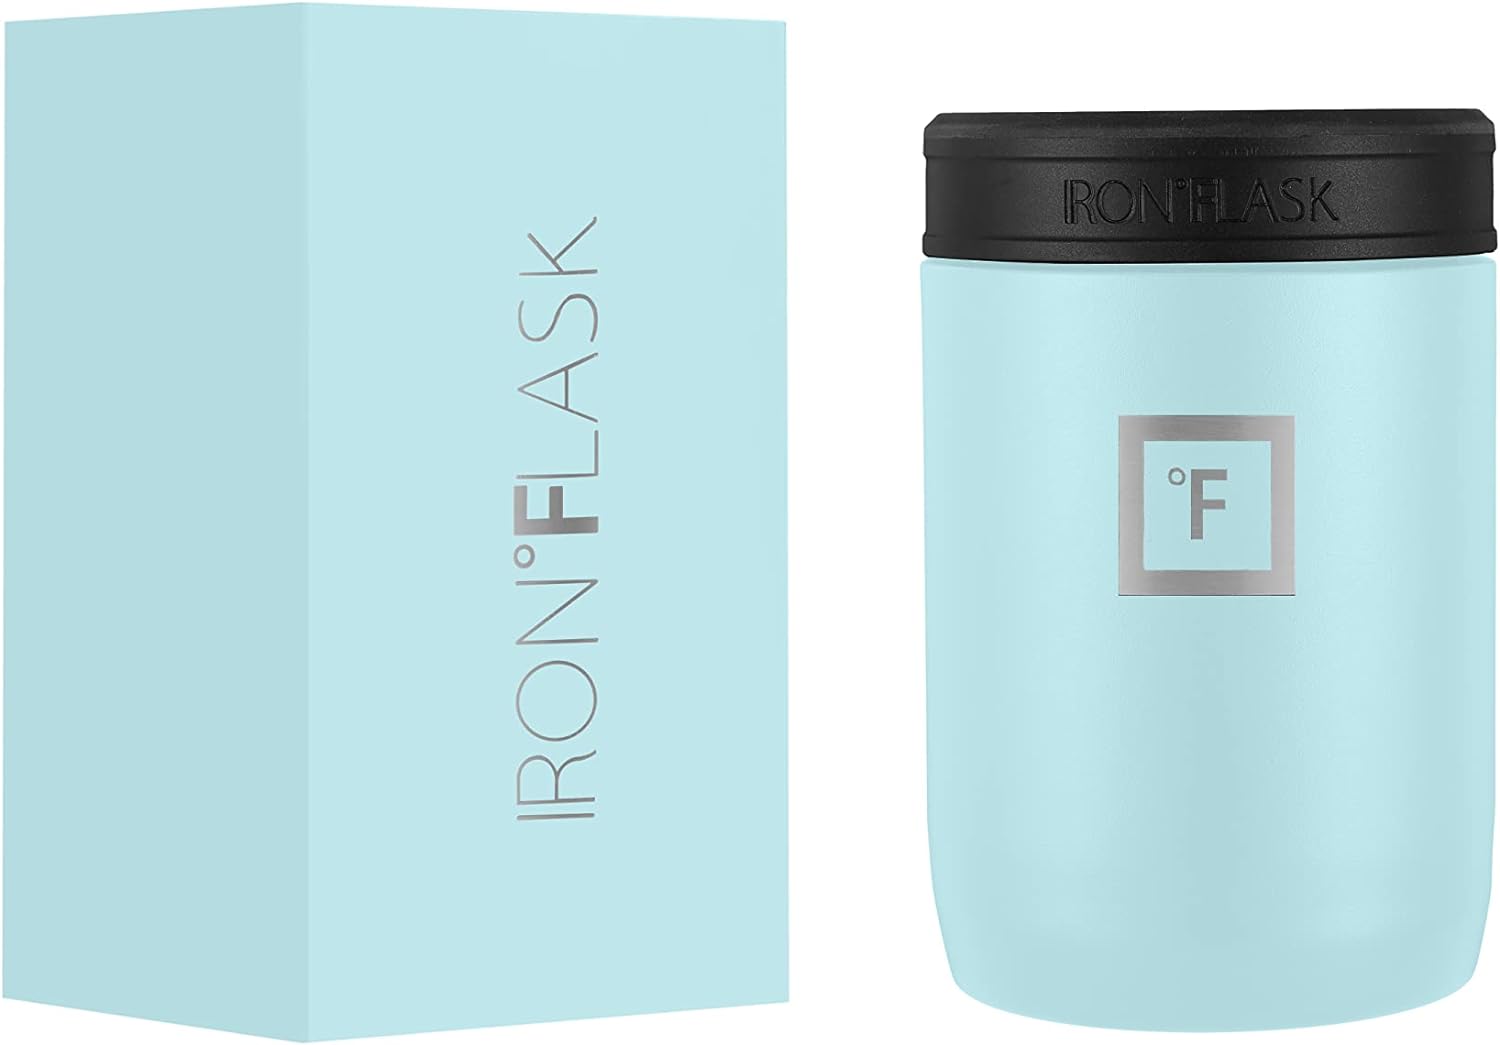 IRON °FLASK Standard Can Cooler 12oz Insulated Stainless Steel Holder for Regular Cans -Rose Gold (YMMV) $3.98